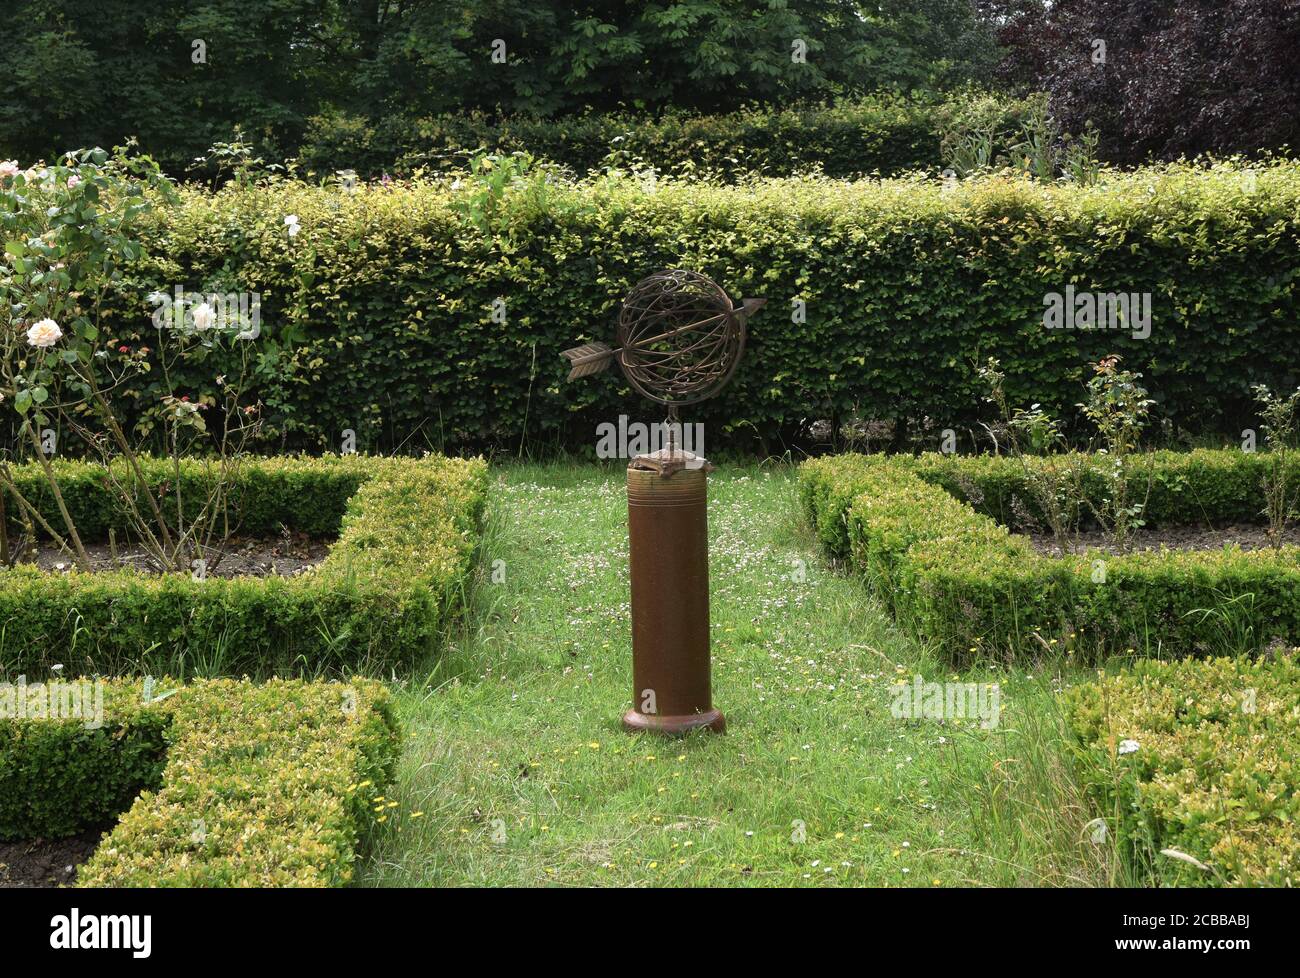 rose garden with armillary and box hedges Stock Photo